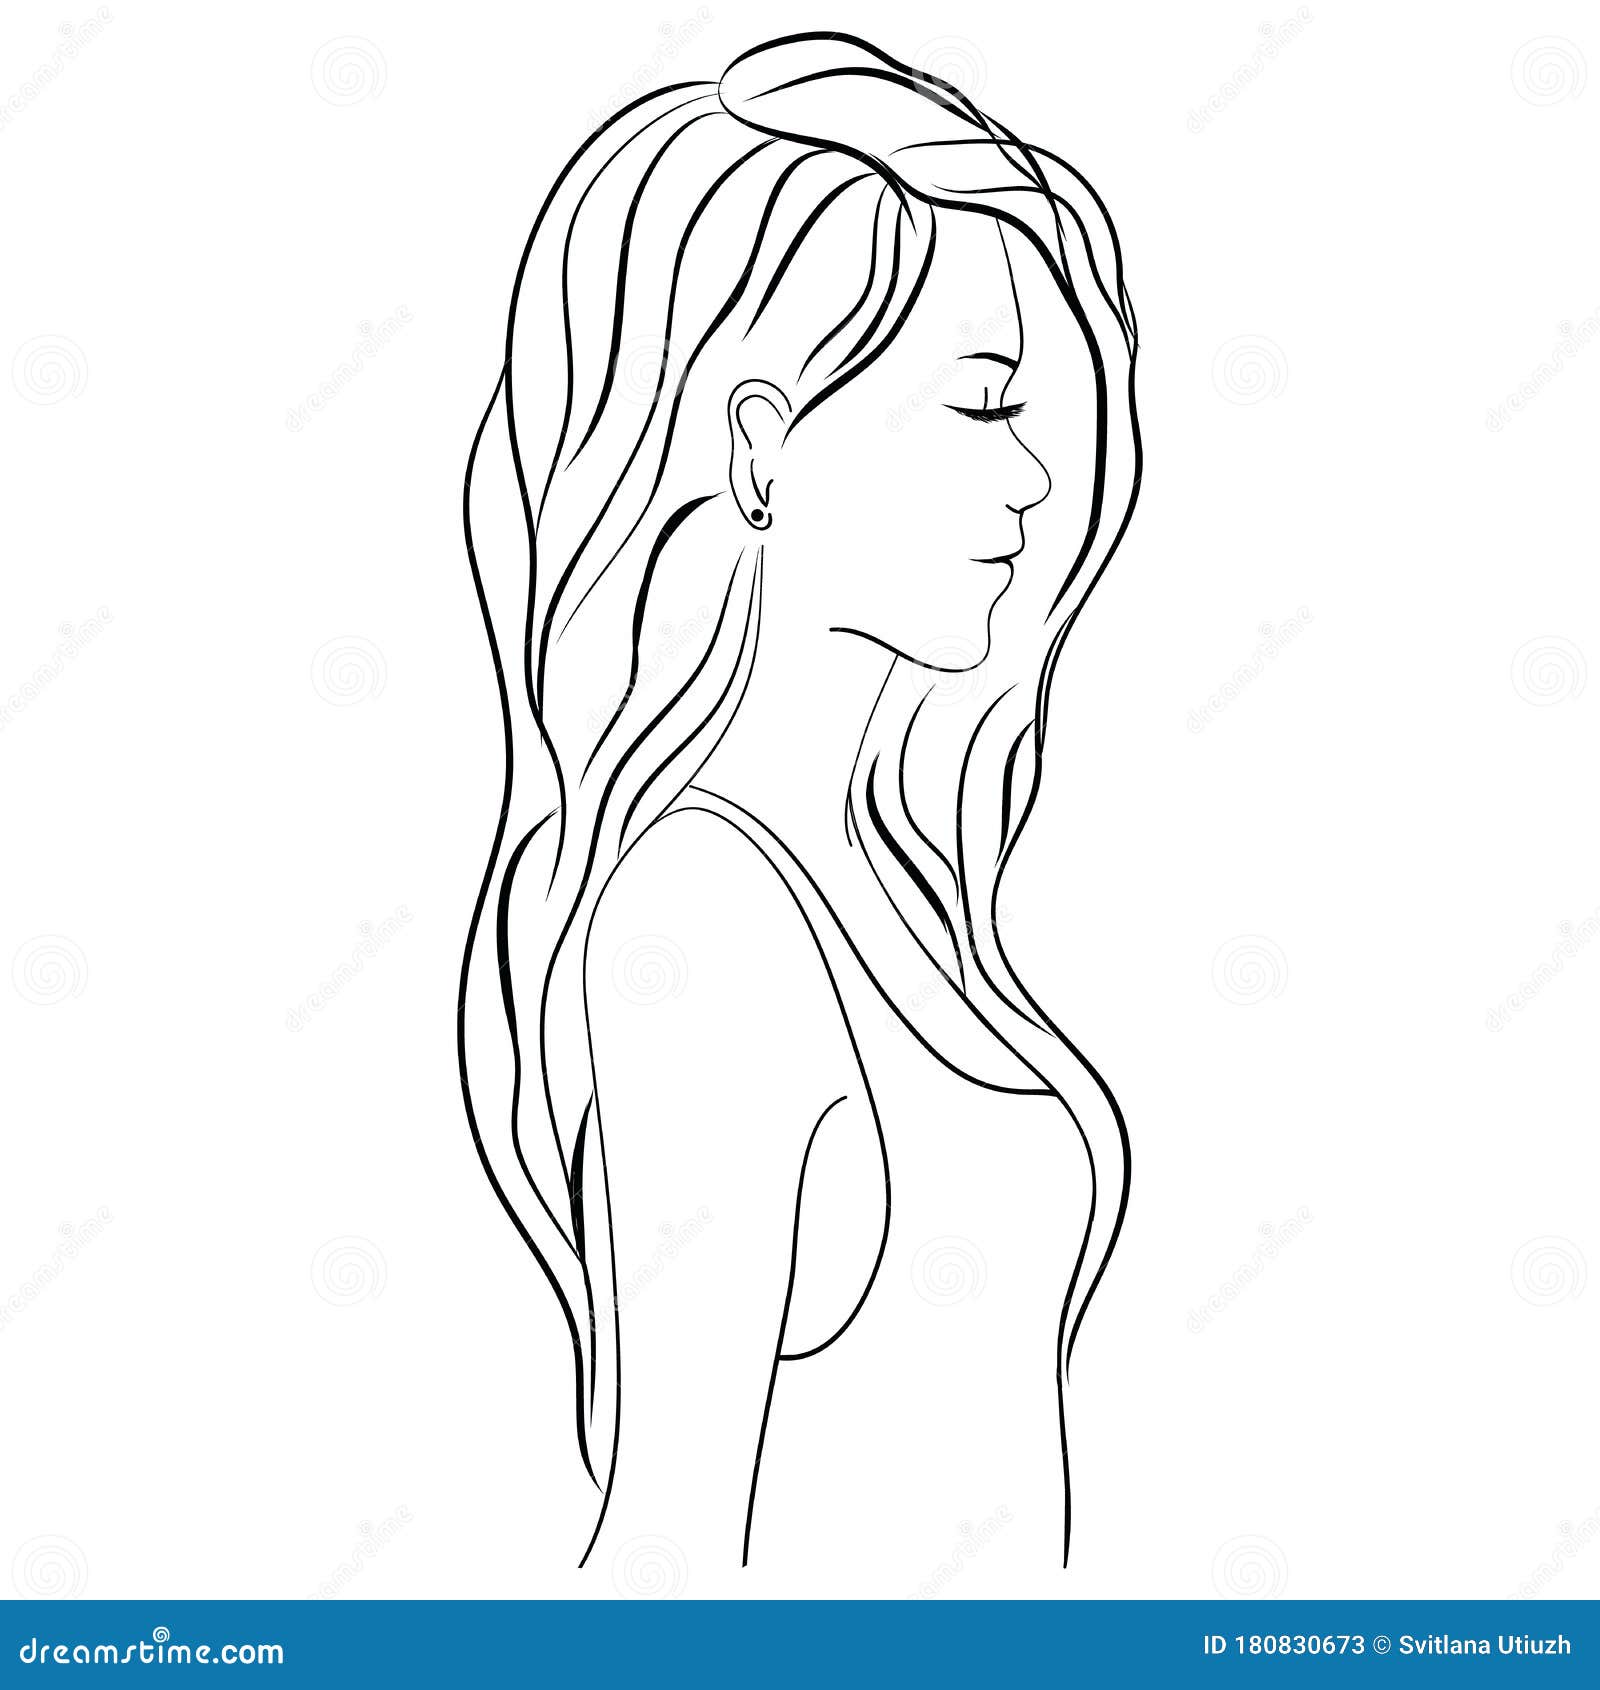 How to Draw The 34 View Of The Male Head